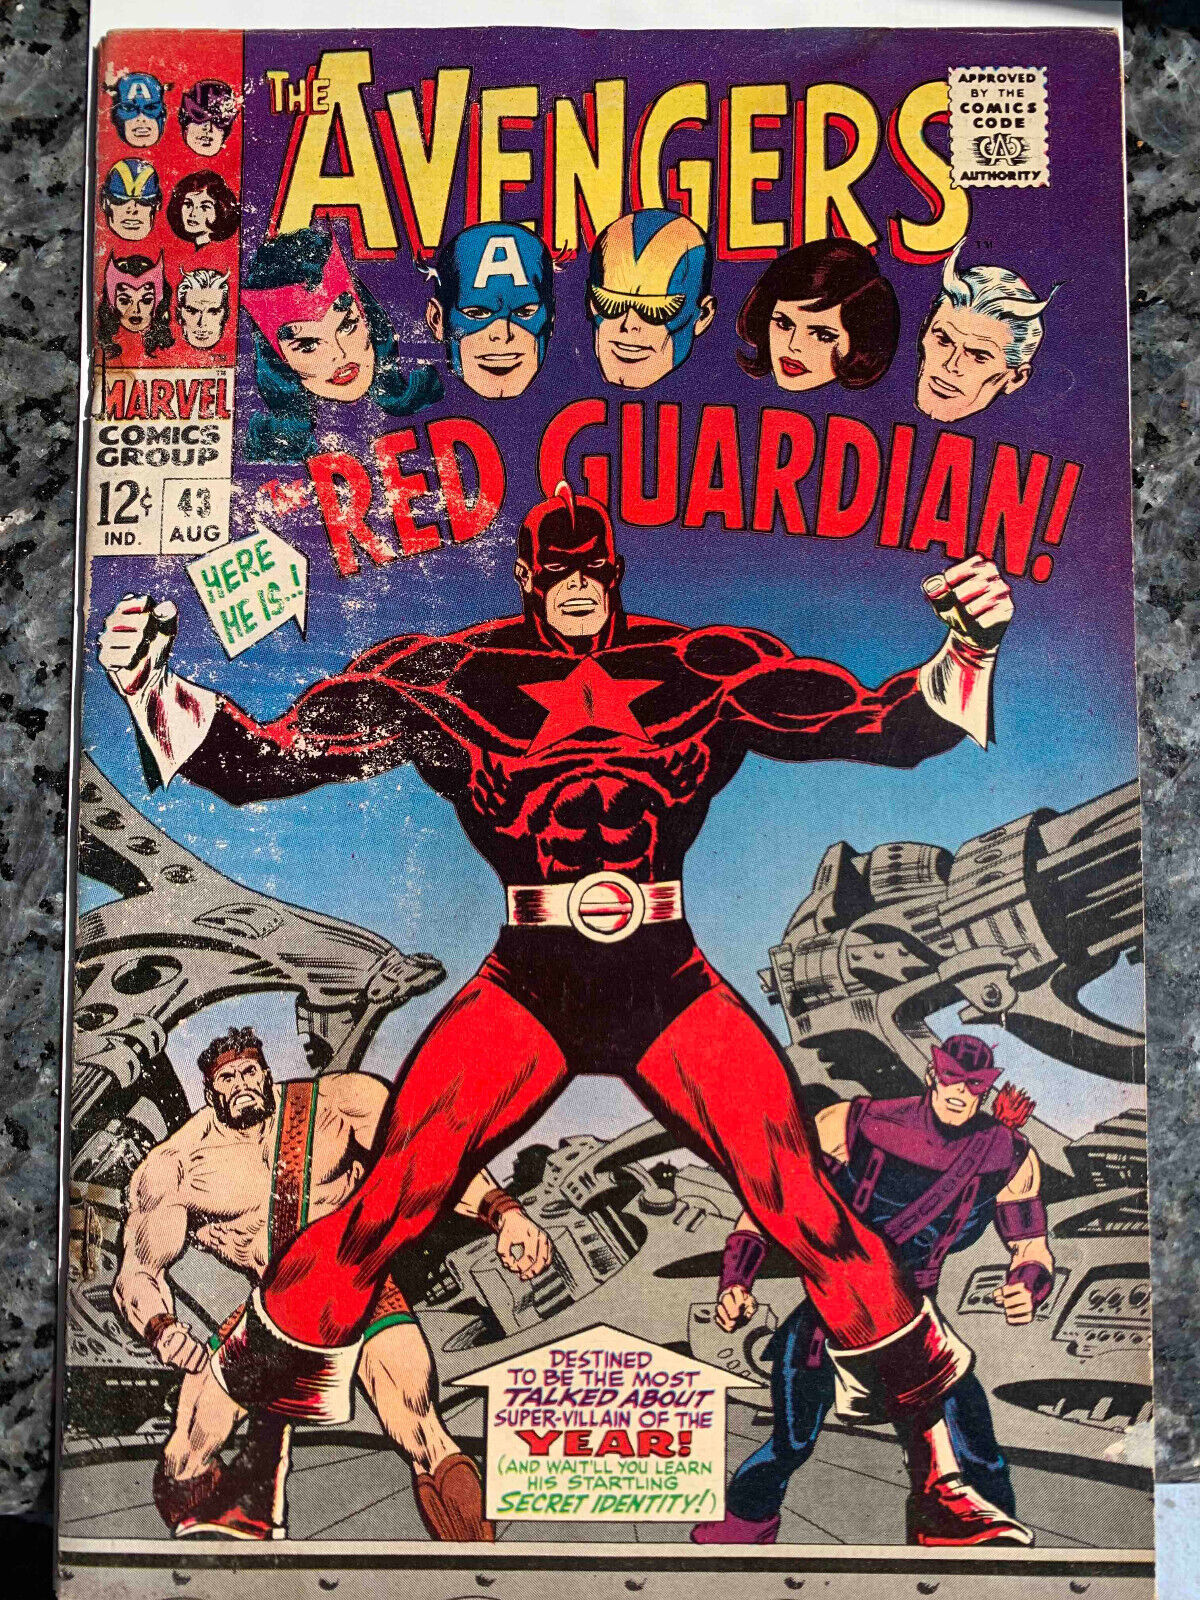 AVENGERS #43 KEY 1ST APPEARANCE RED GUARDIAN BLACK WIDOW QUALITY READER COPY